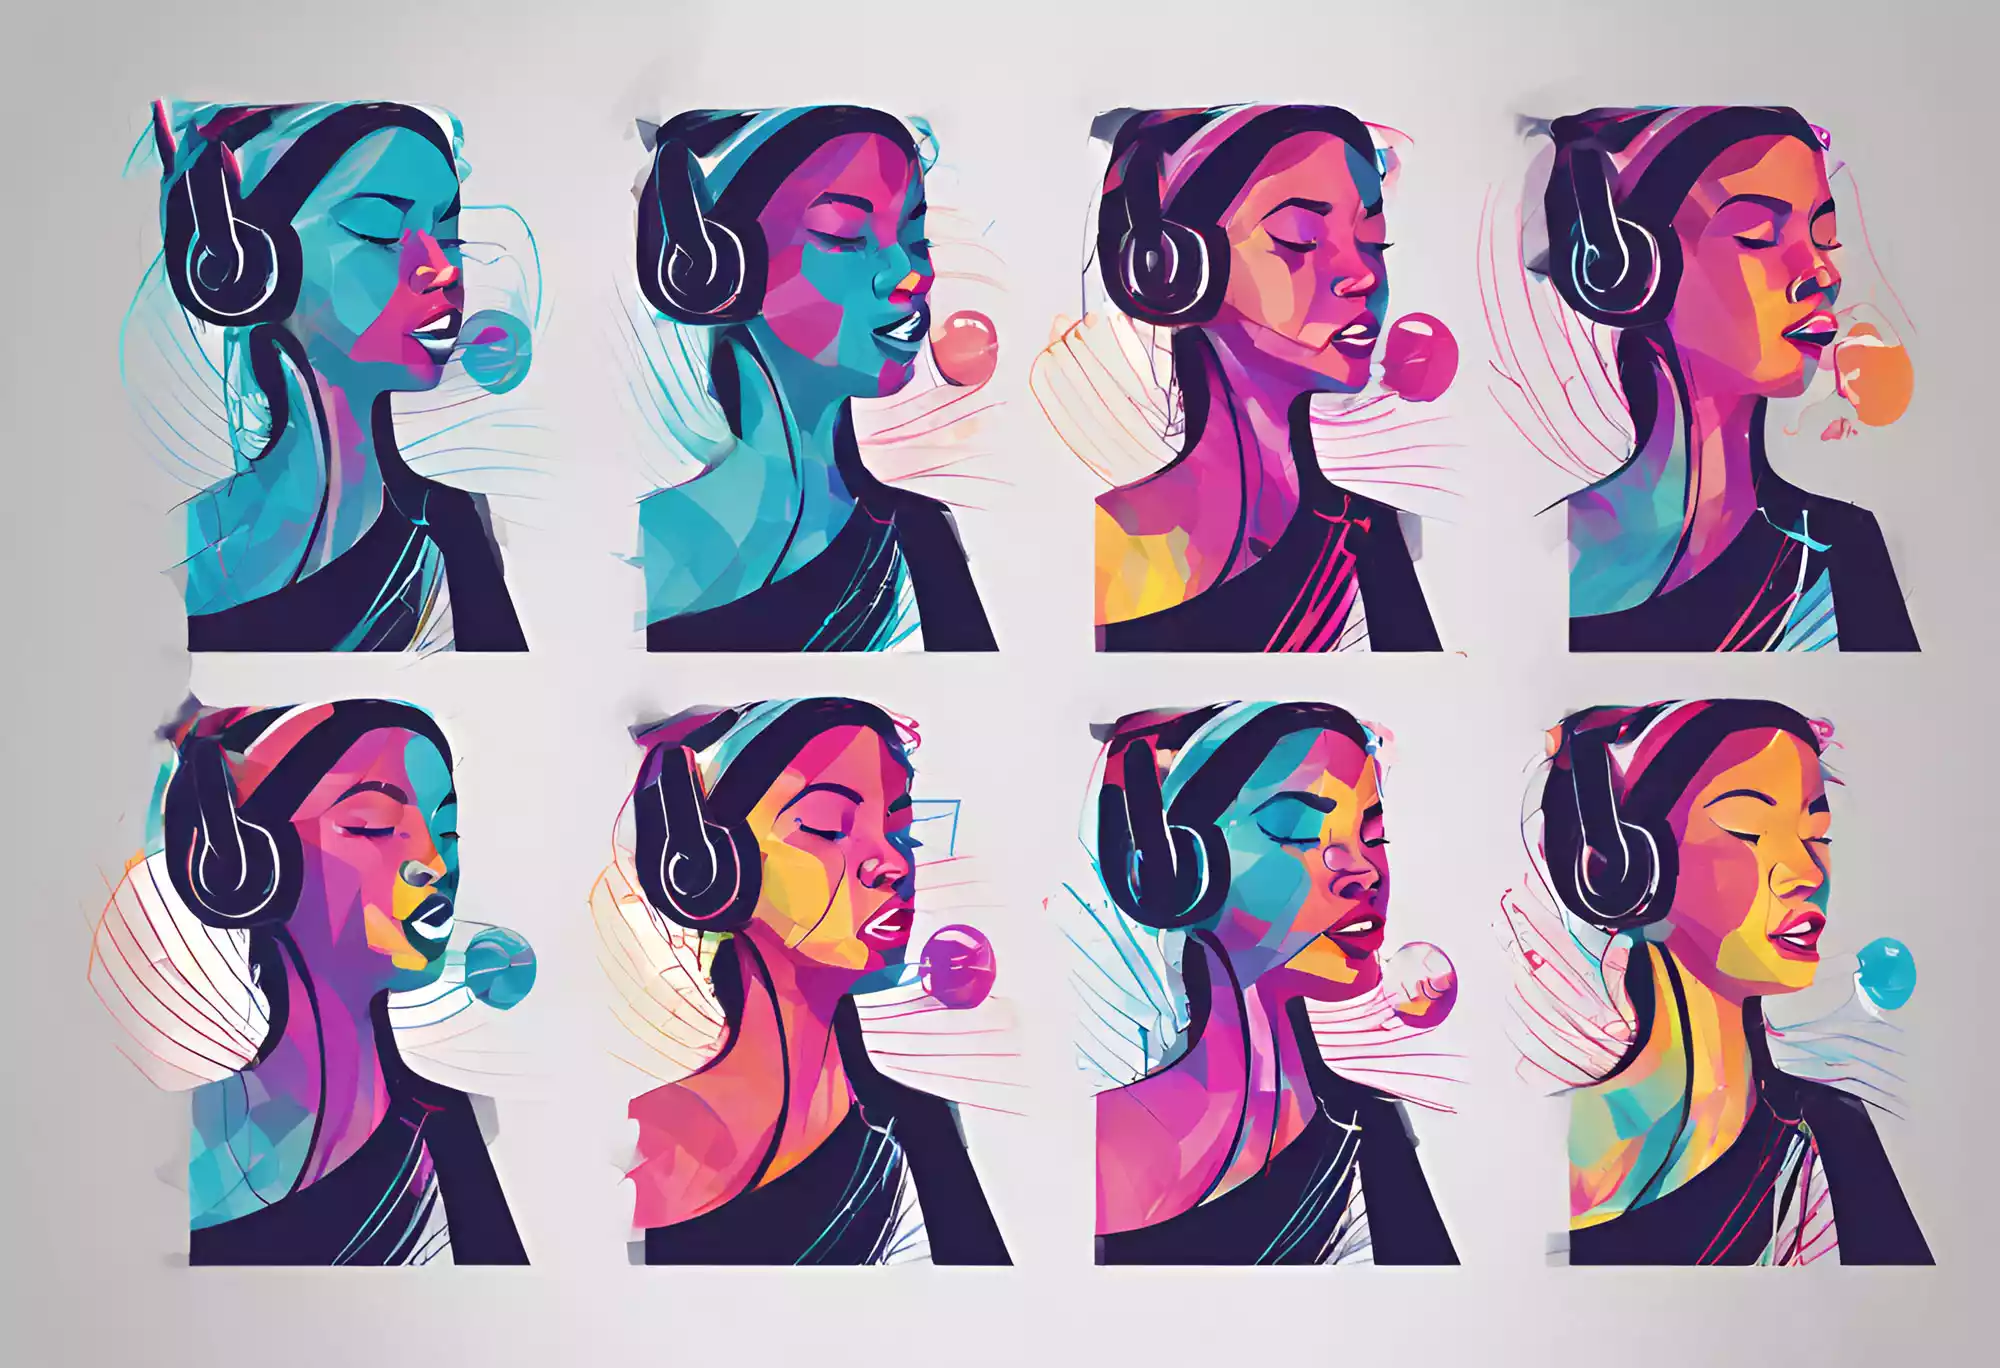 a visual representation of a singer's vocal journey through a series of progressive vocal exercises